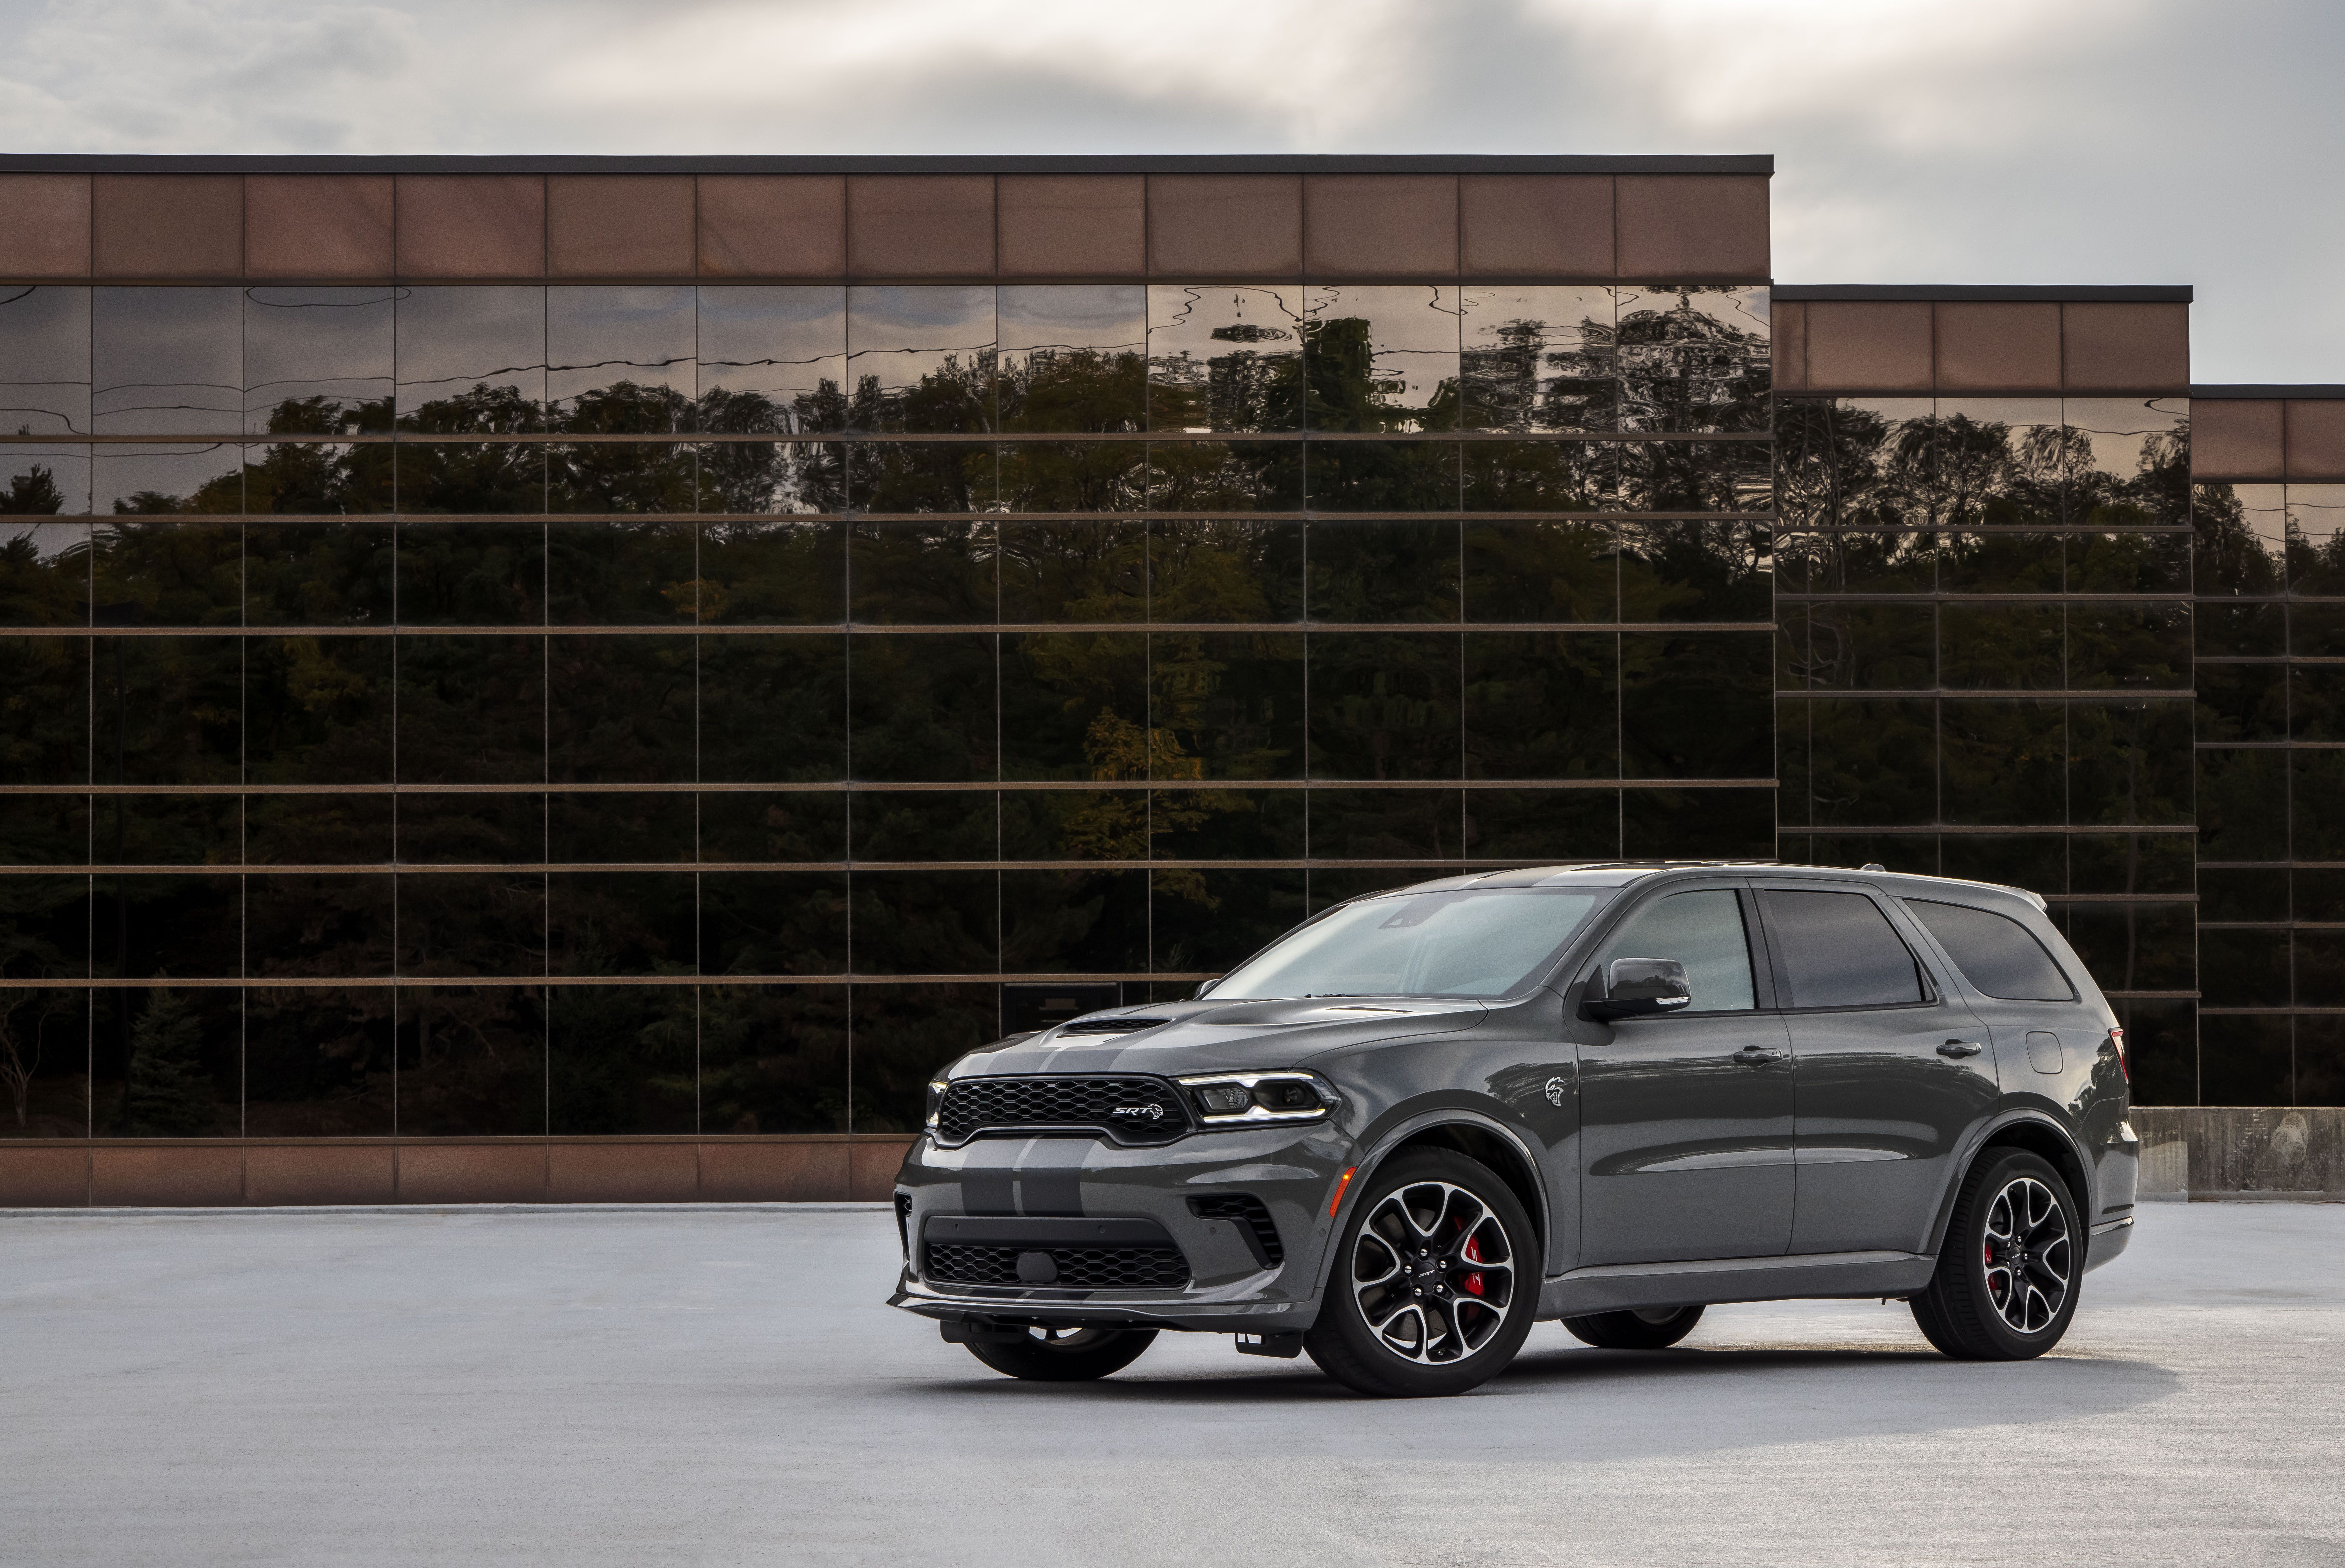 2021 Dodge Durango Srt Hellcat Review Pricing And Specs - roblox id dodge charger 1970 start up